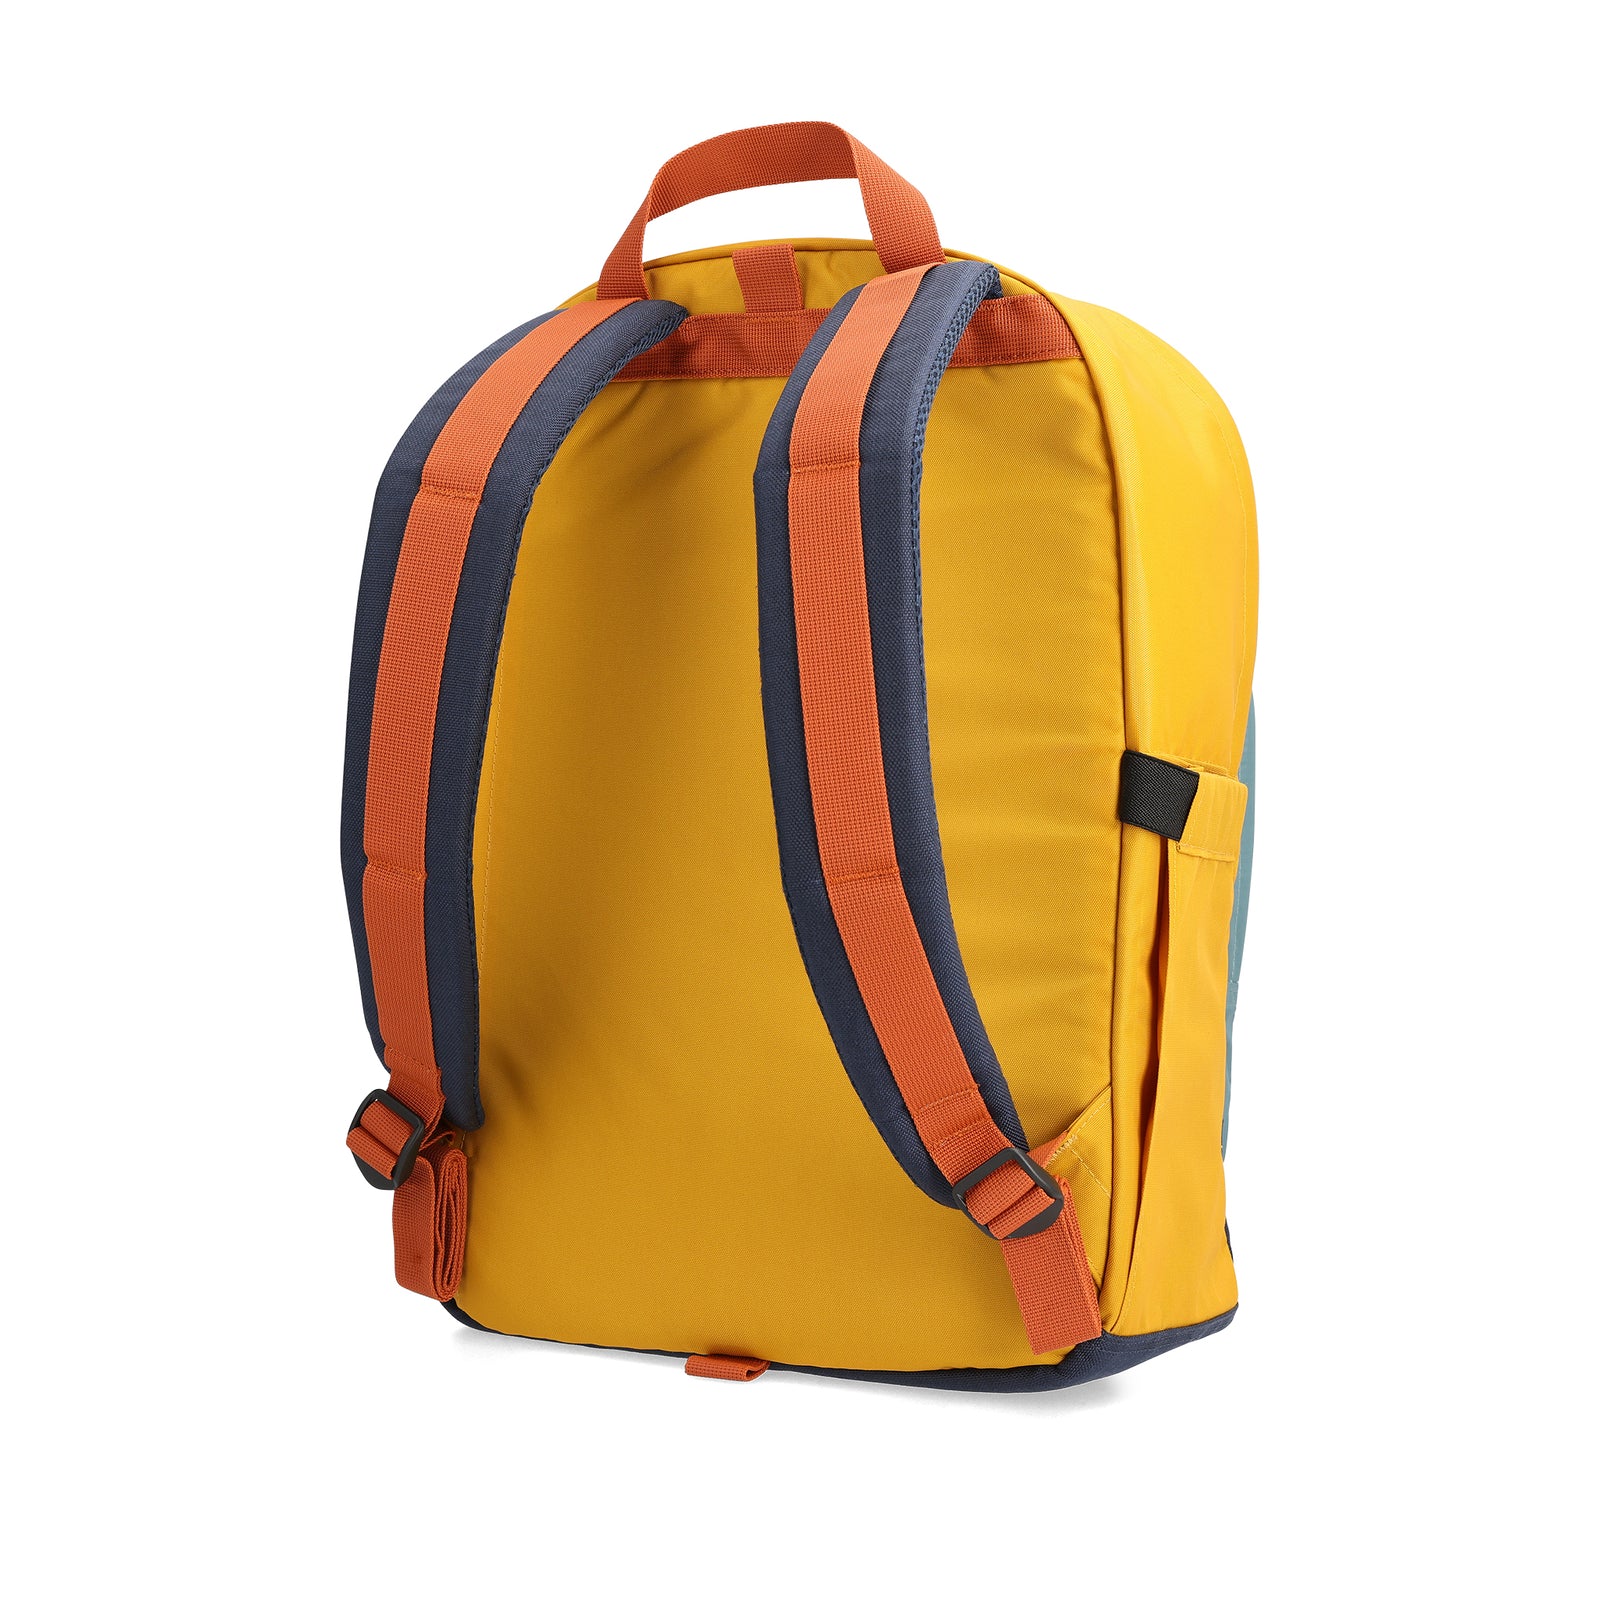 Back View of Topo Designs Session Pack  in "Sea Pine / Mustard"